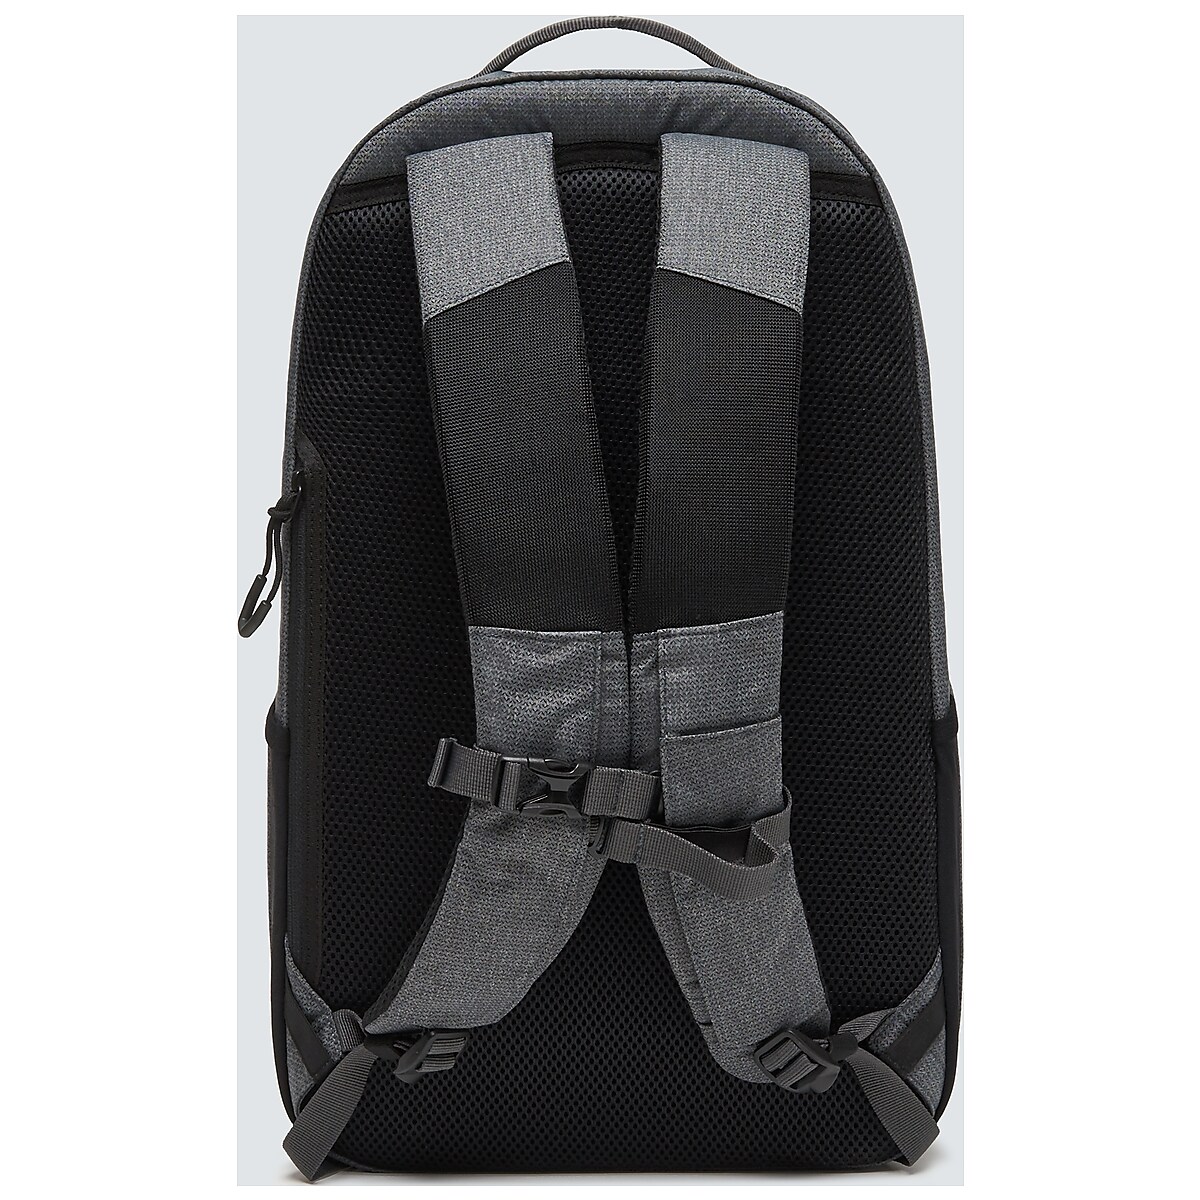 Oakley Essential Backpack M 6.0 - New Athletic Gray - FOS900983-27B | Oakley  JP Store